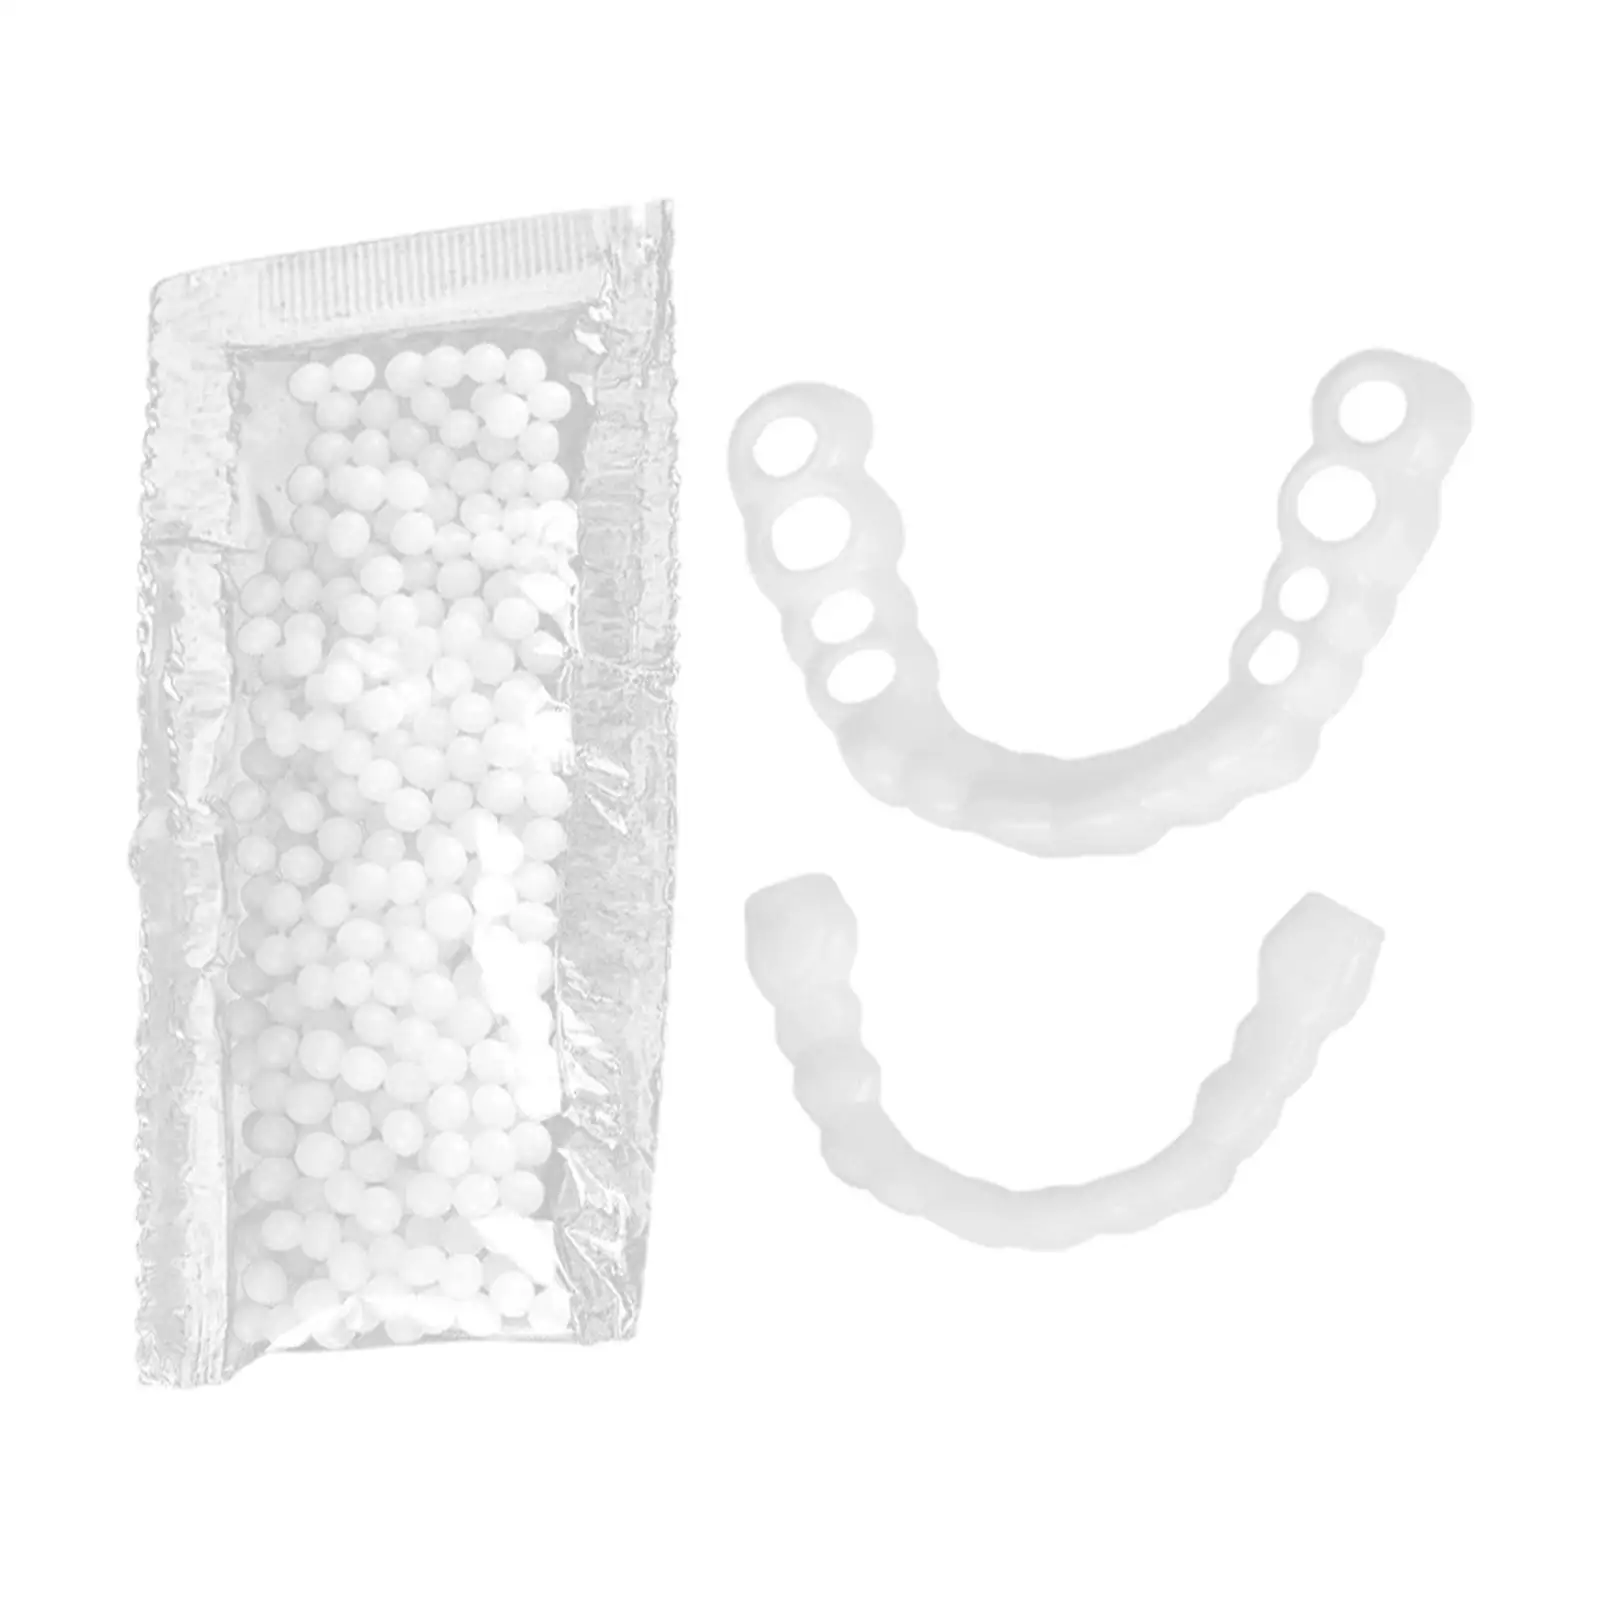 Upper Lower False Teeth Covers Set Veneers Denture Simulation Cover White Fake Tooth Covers for Whitening Cosmetic Teeth Smile